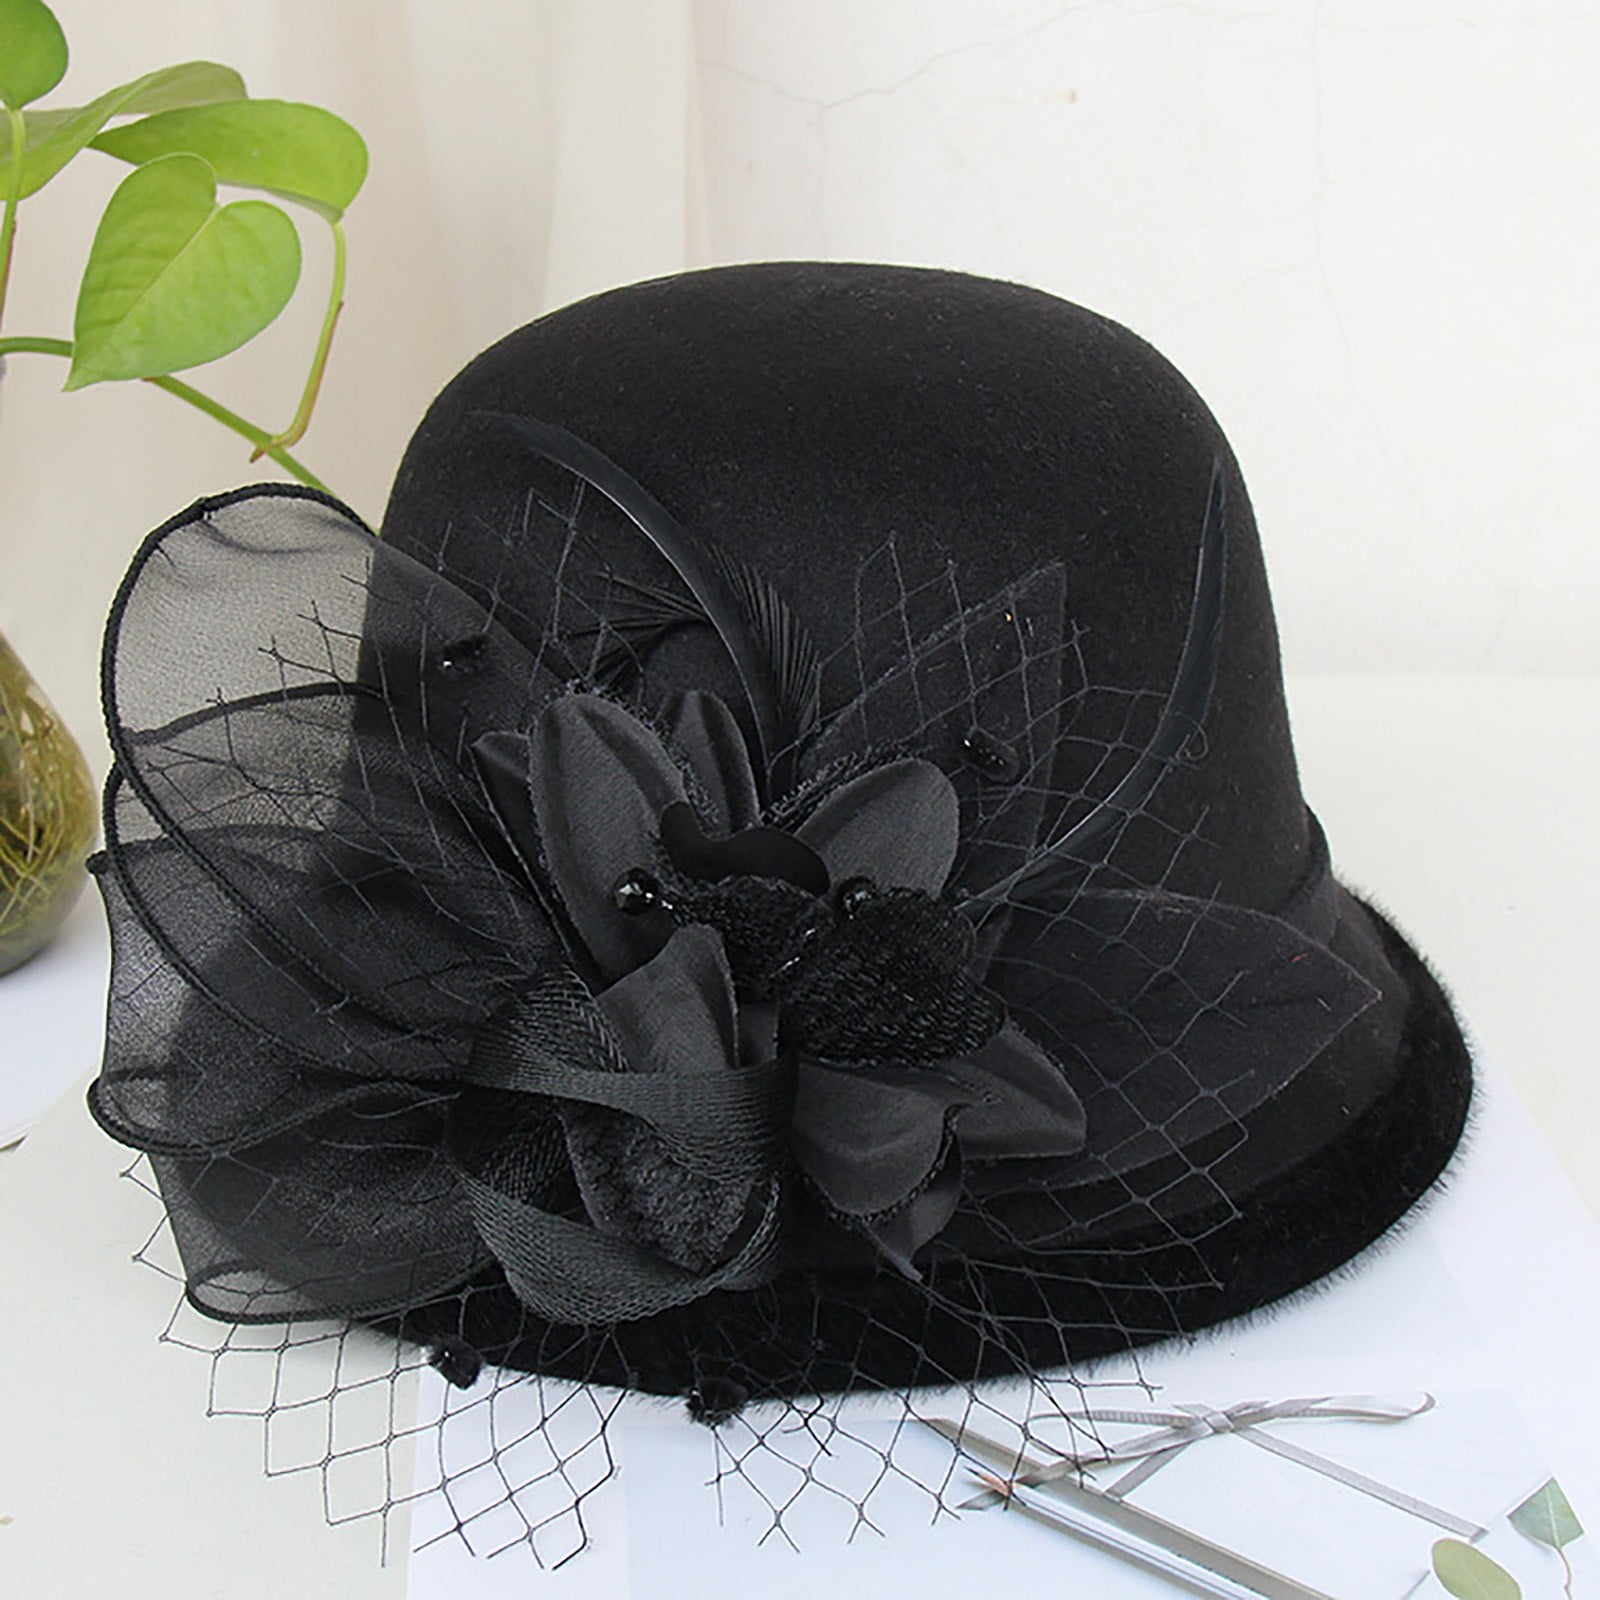 KI-8jcuD Beach Hats For Women Women'S Autumn And Winter Flowers Round Top  Casual Fisherman'S Basin Cap Small Bowler Hat Features: Coneflower Black